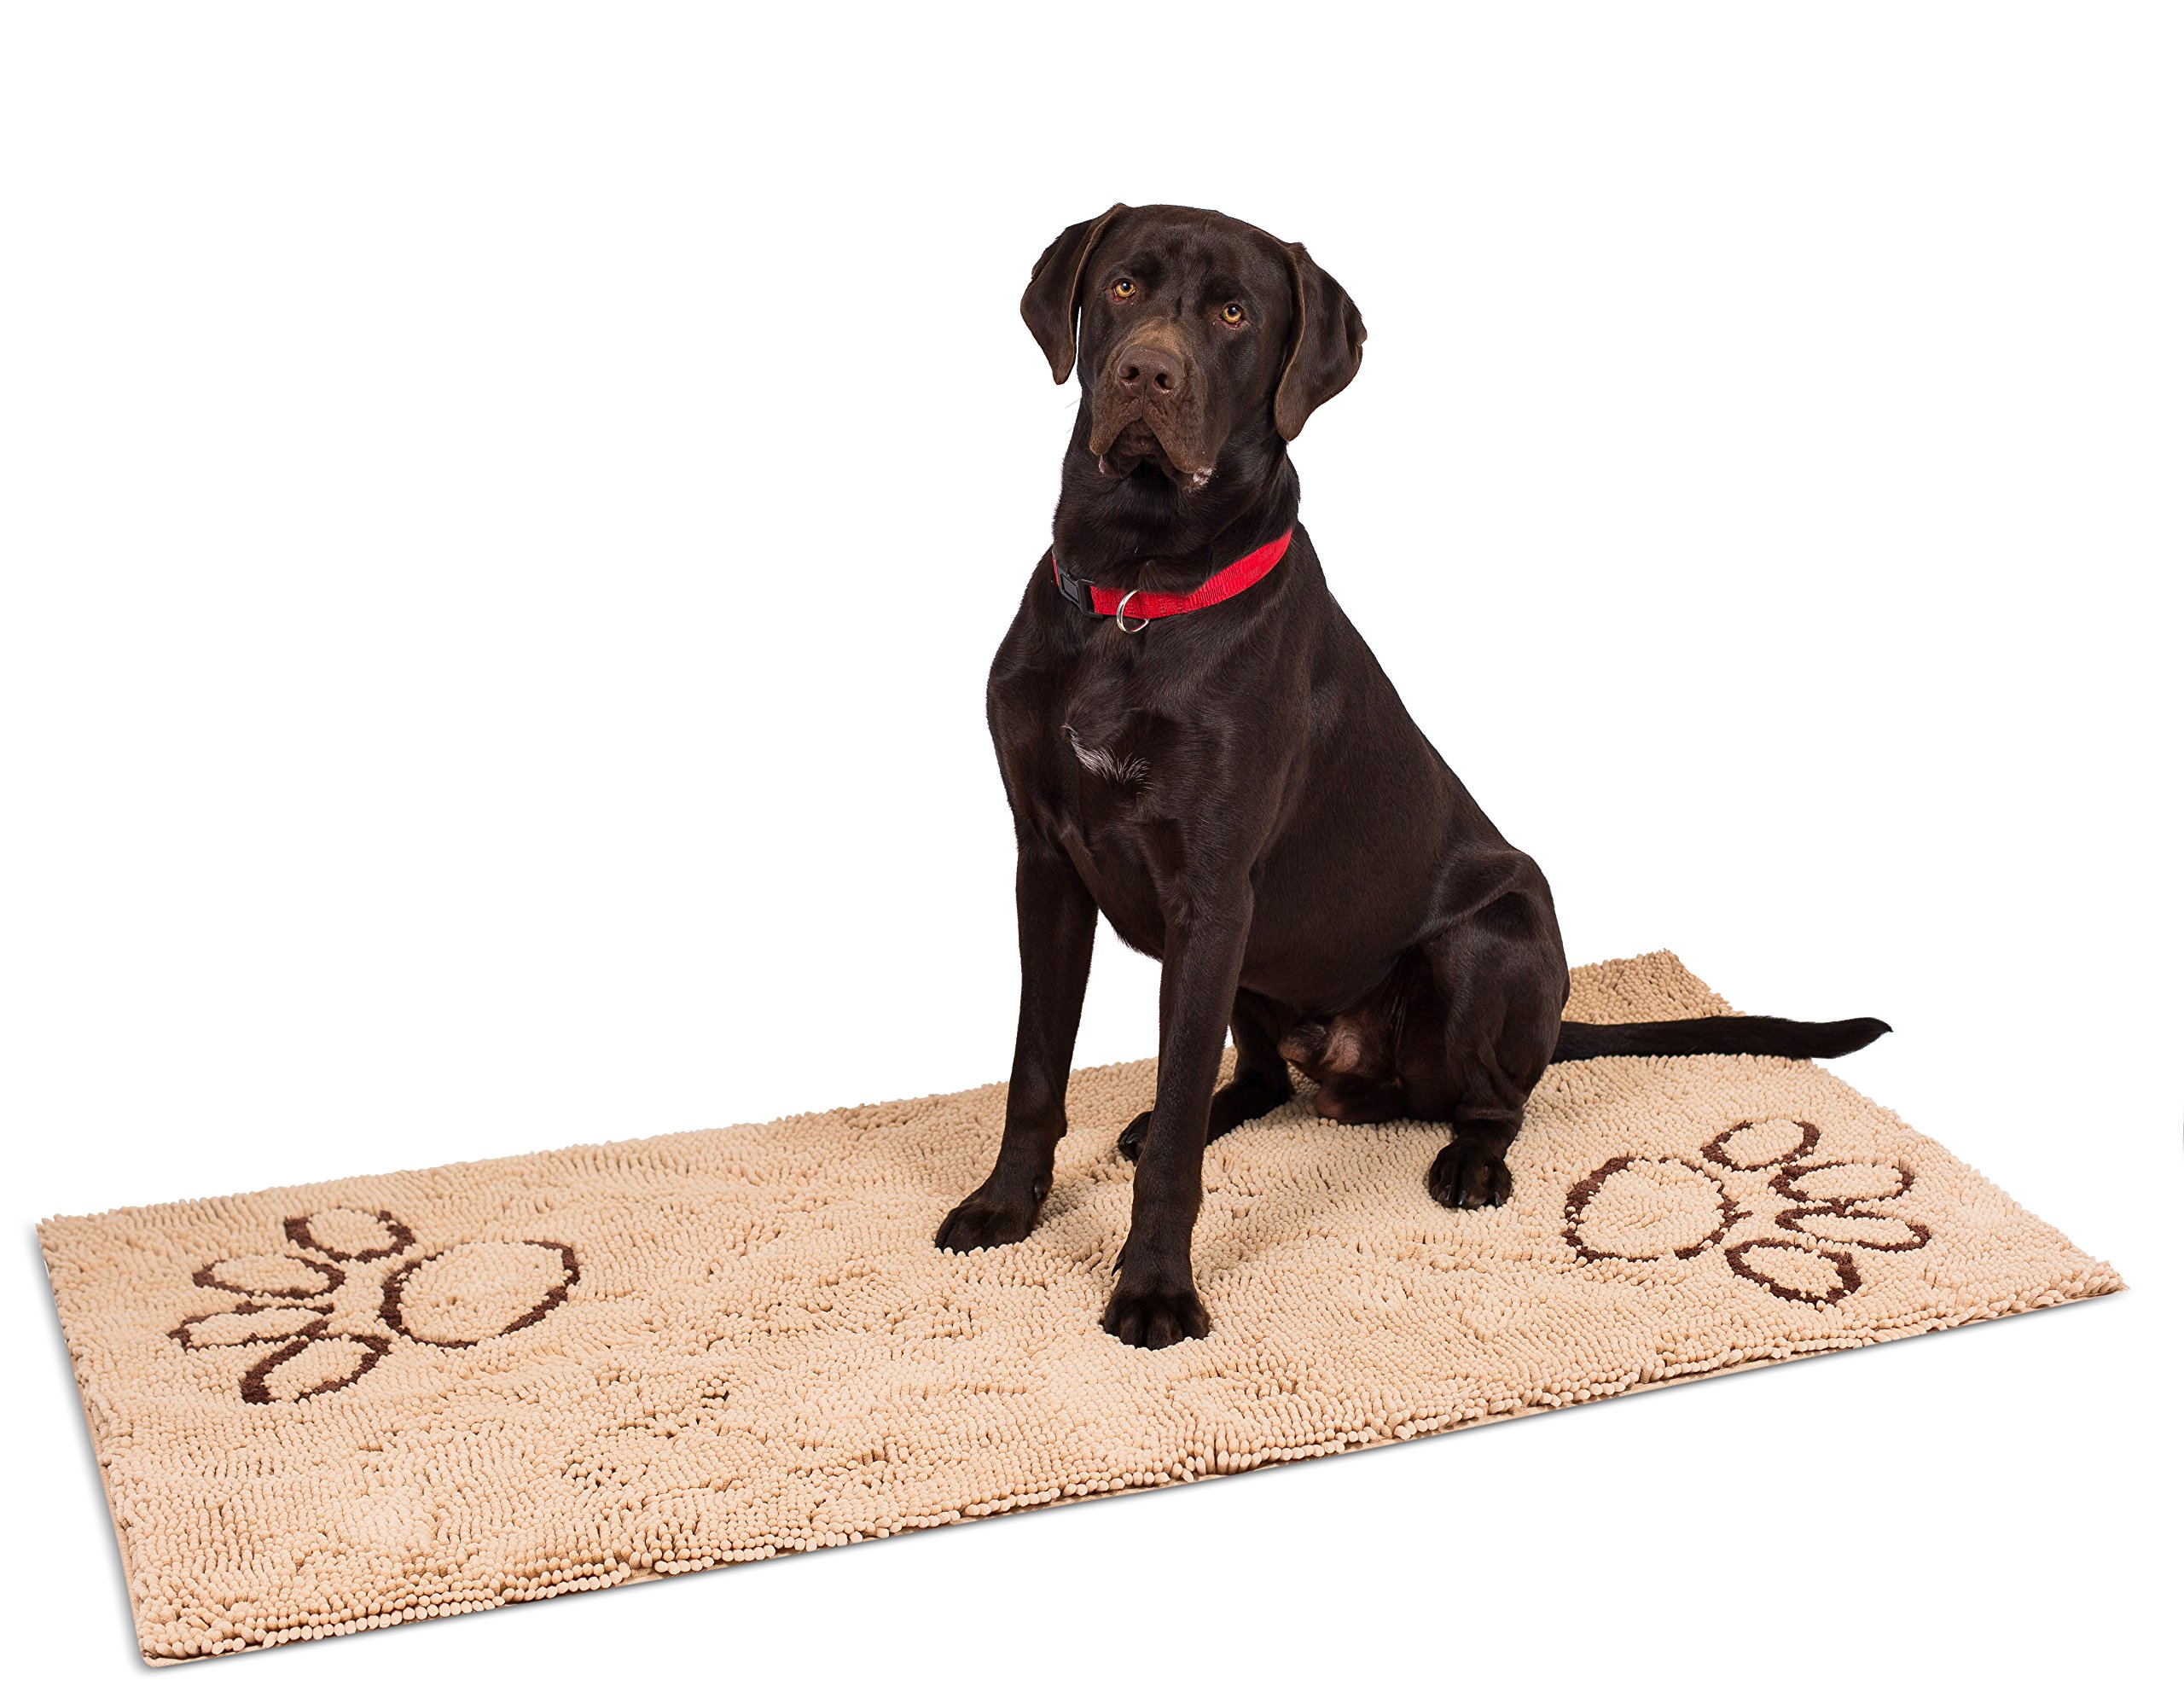 internet\'s best Internet's Best Internets Best chenille Dog Doormat - 60 x 30 - Absorbent Surface - Non-Skid Bottom - Protects Floors - Tan